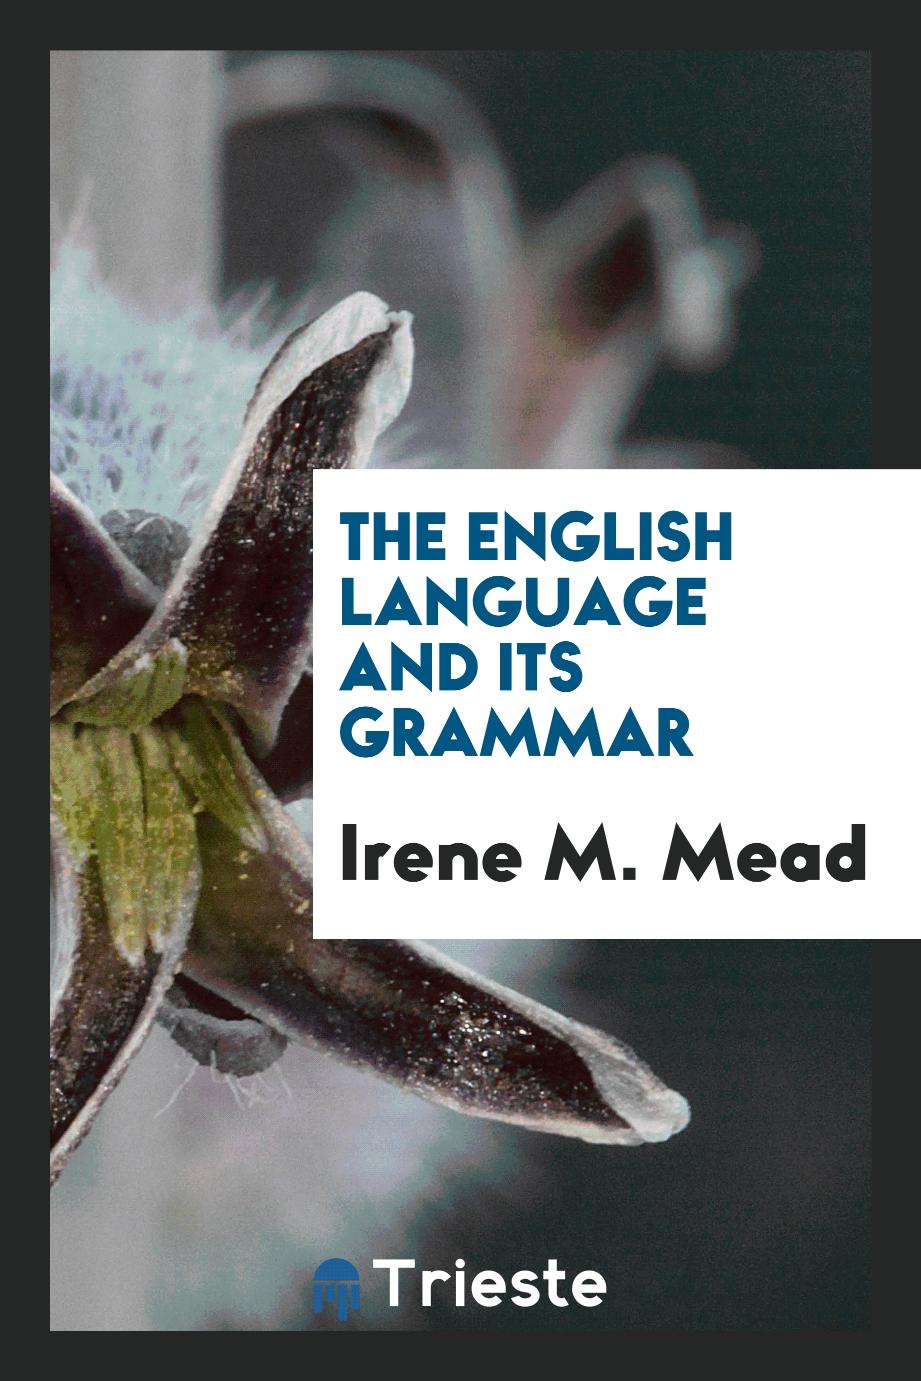 Irene M. Mead - The English Language and Its Grammar